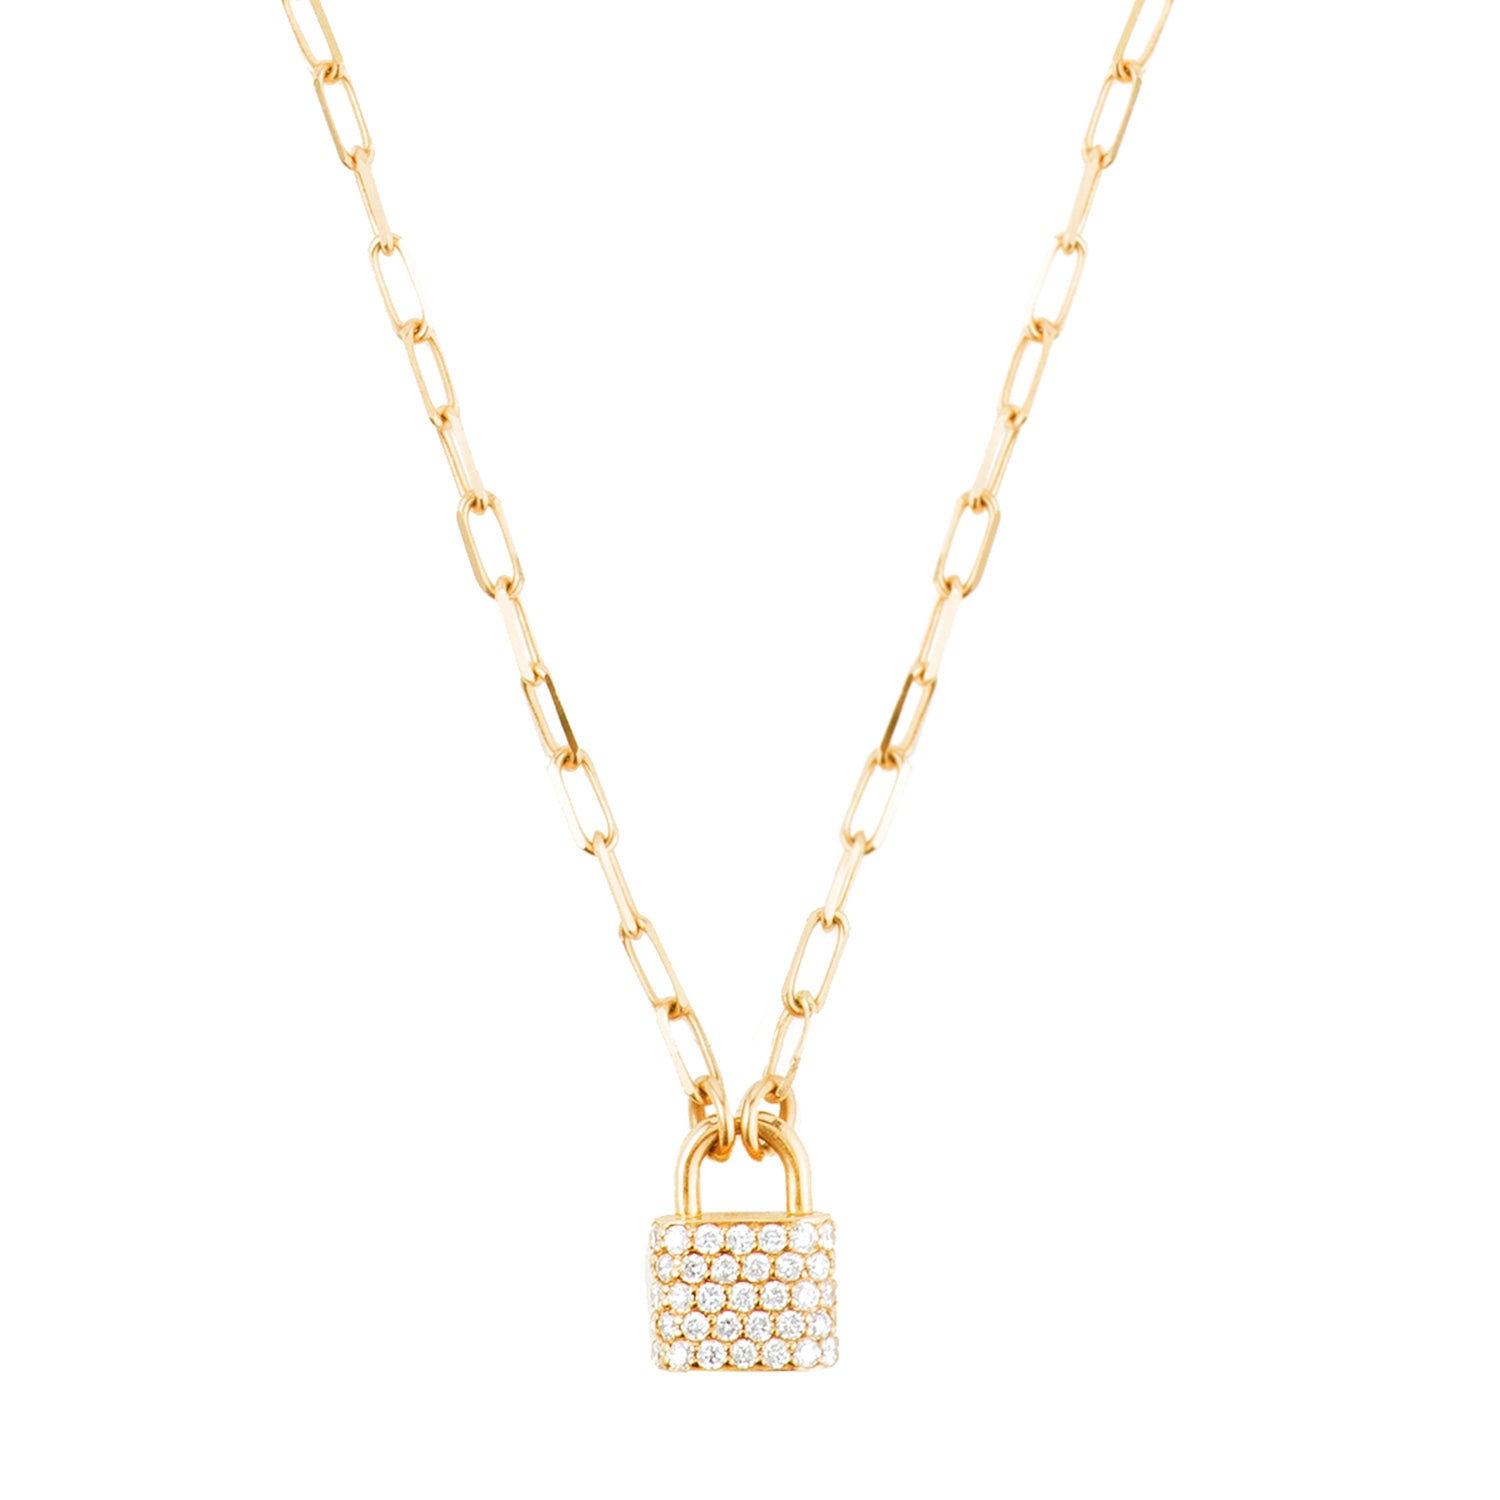 14kt Gold and Full Diamond Love Lock Necklace